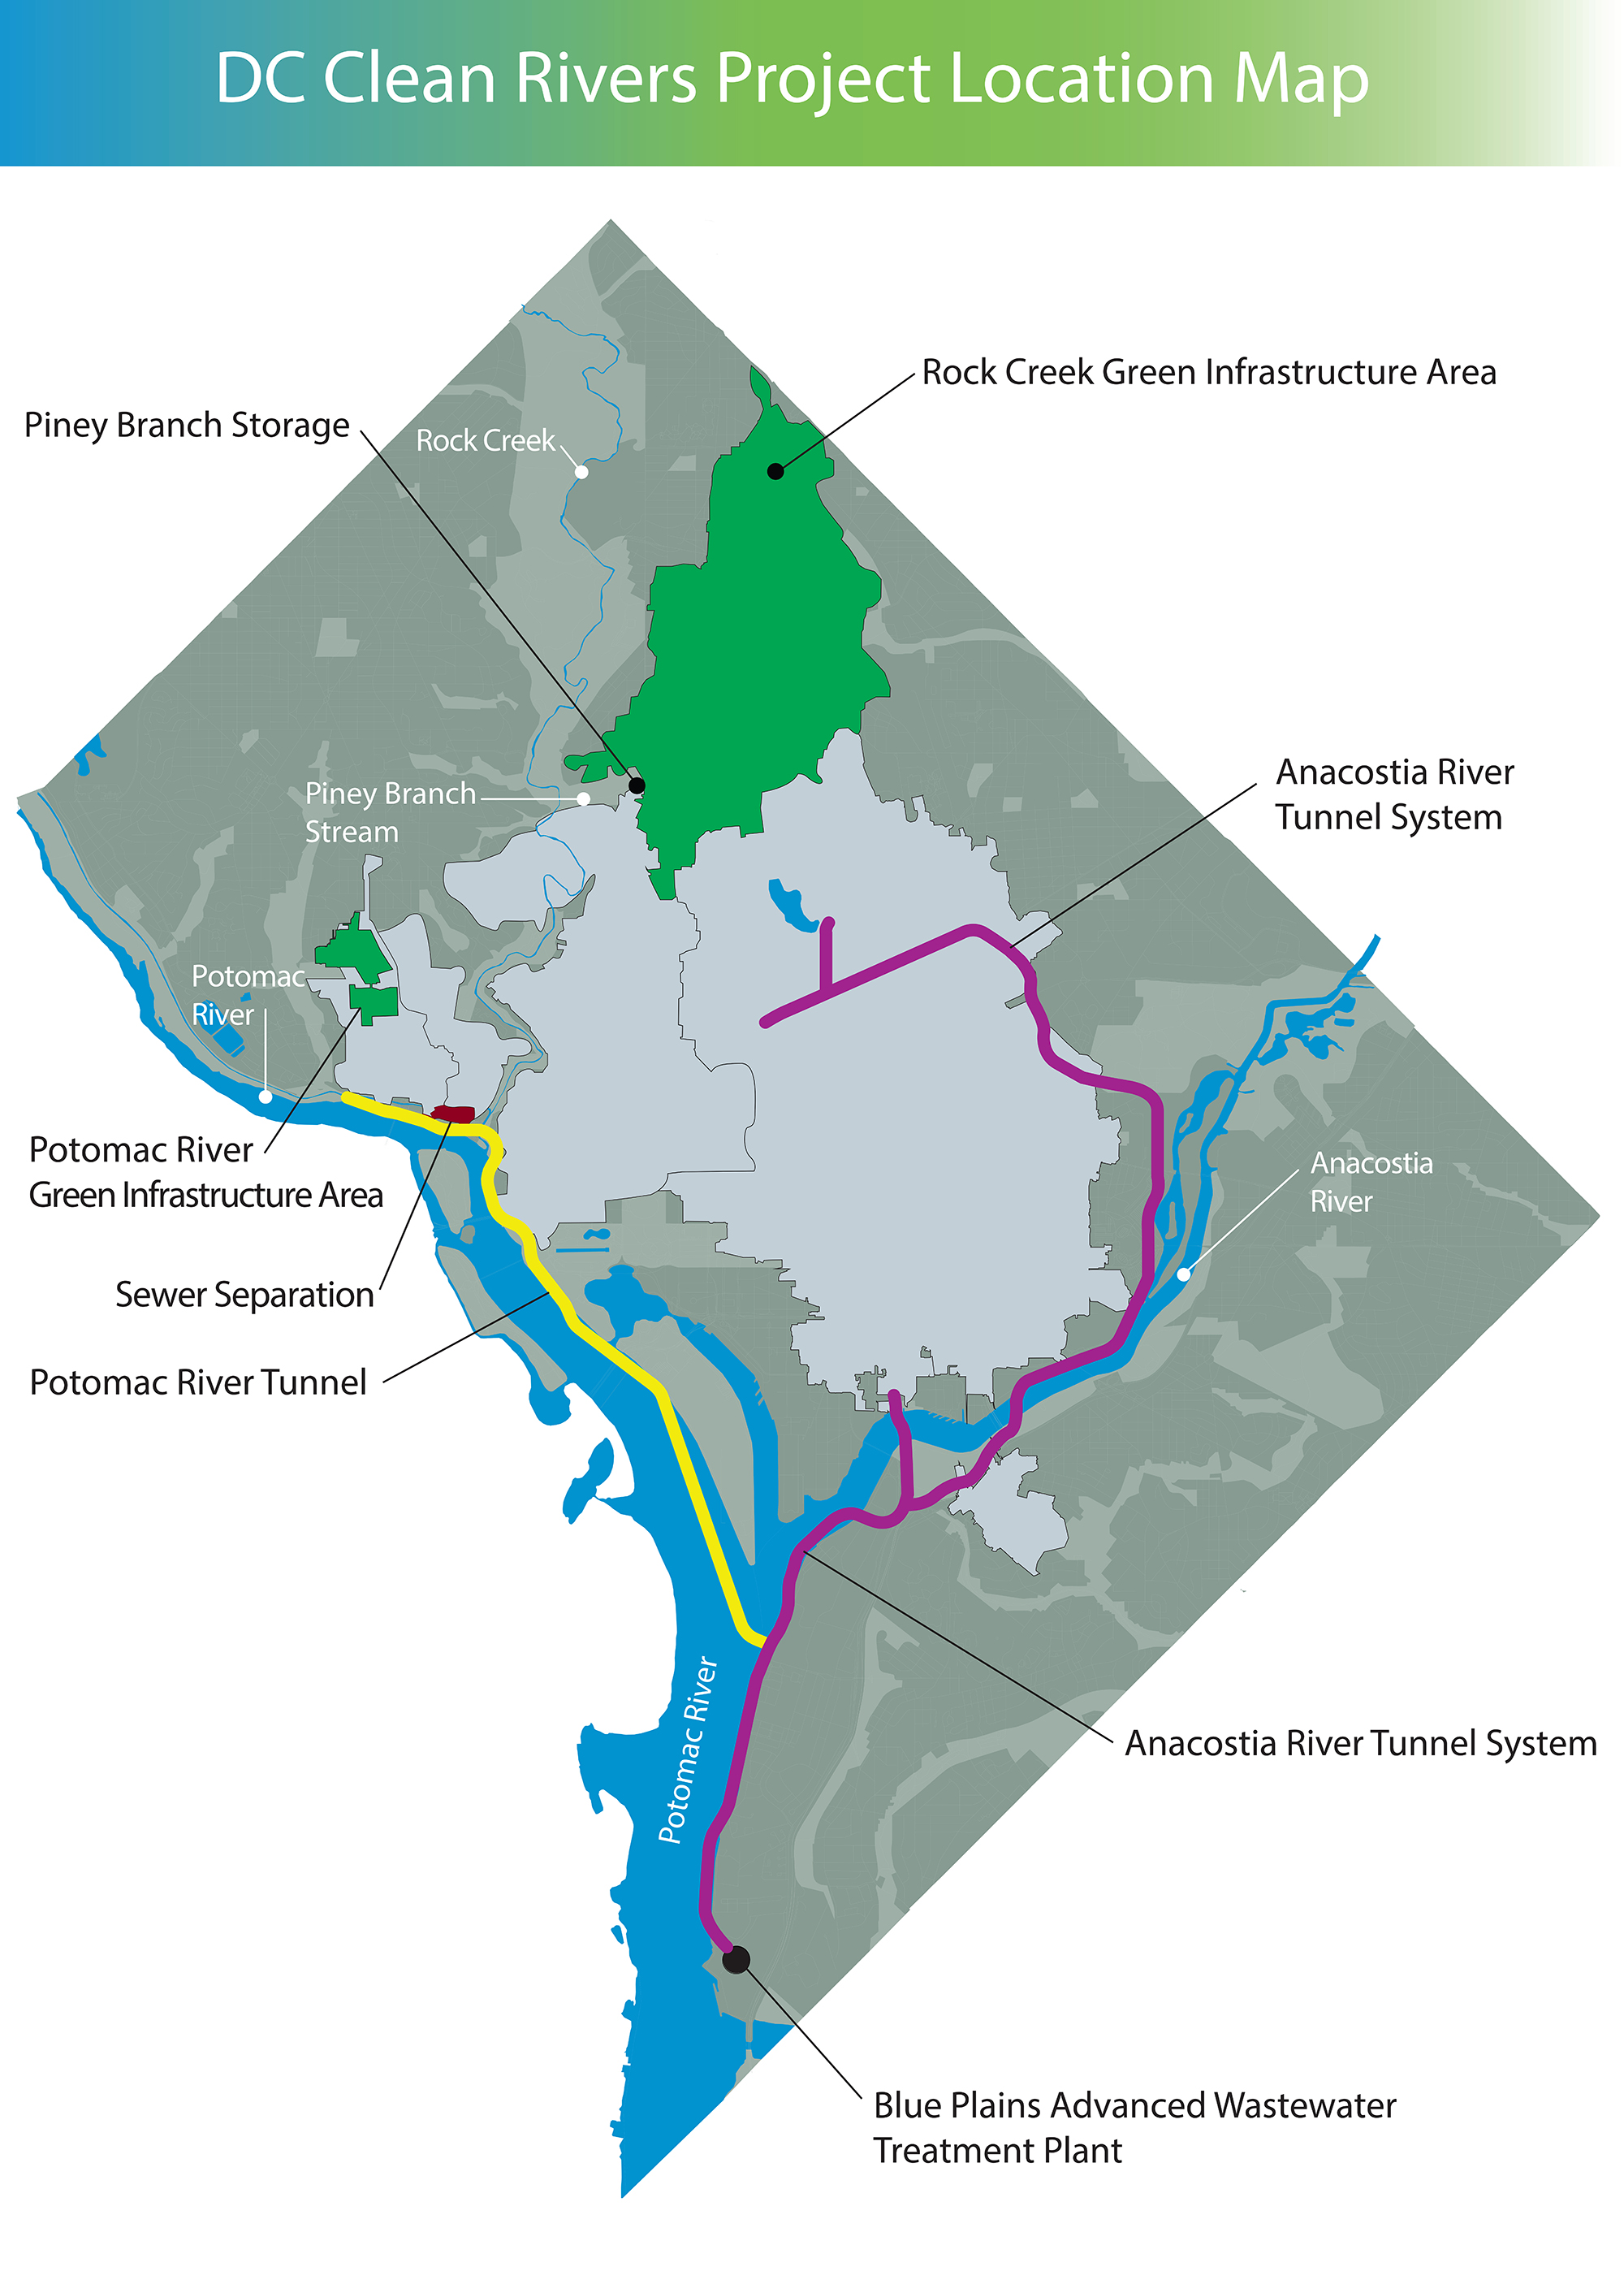 DC Clean Rivers Project location map (Map courtesy DC Water)